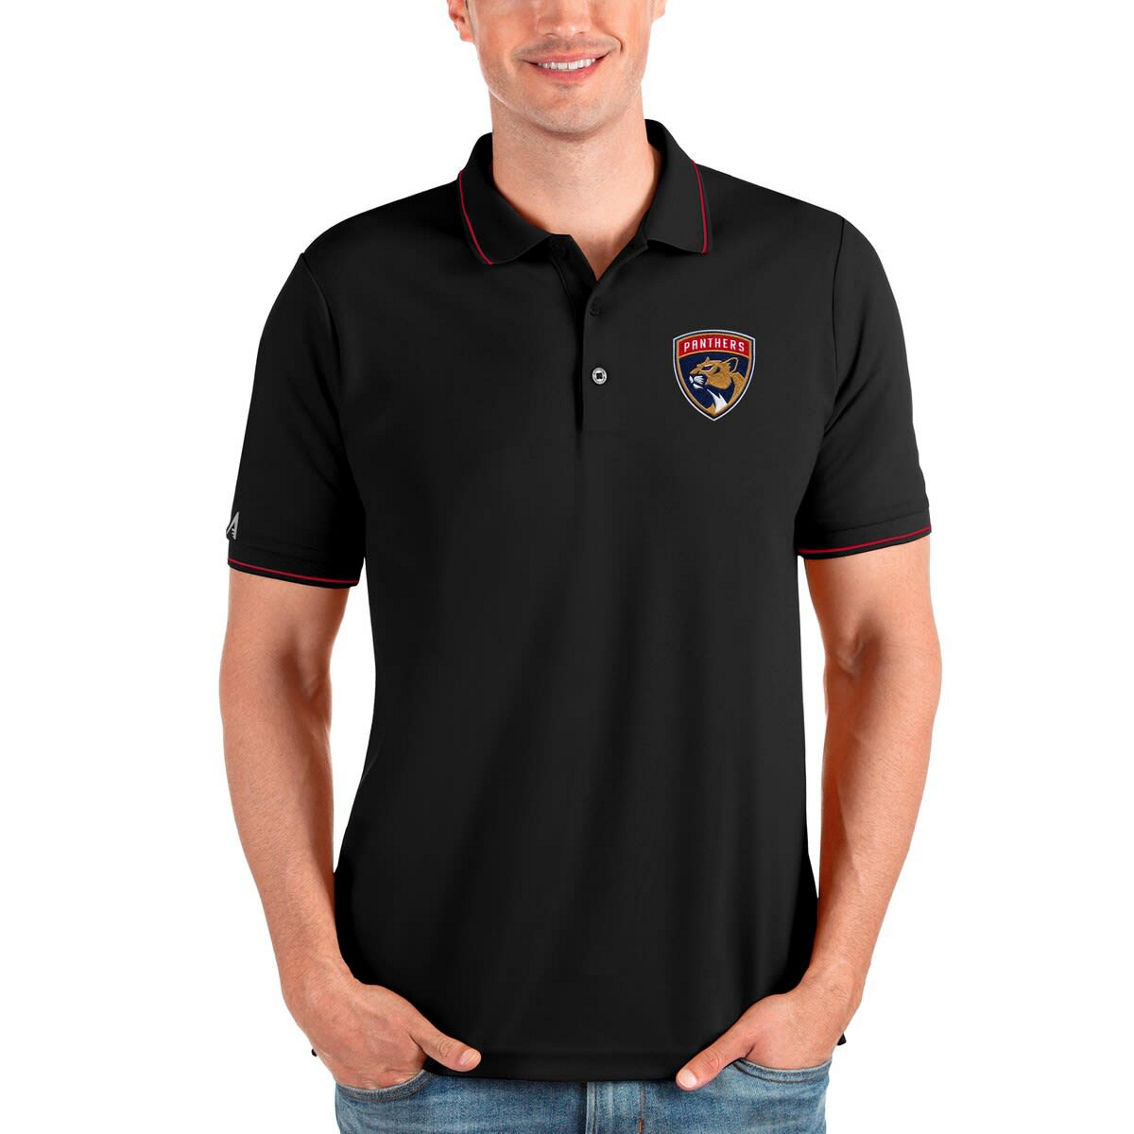 Antigua Men's Black/Red Florida Panthers Affluent Polo - Image 2 of 2